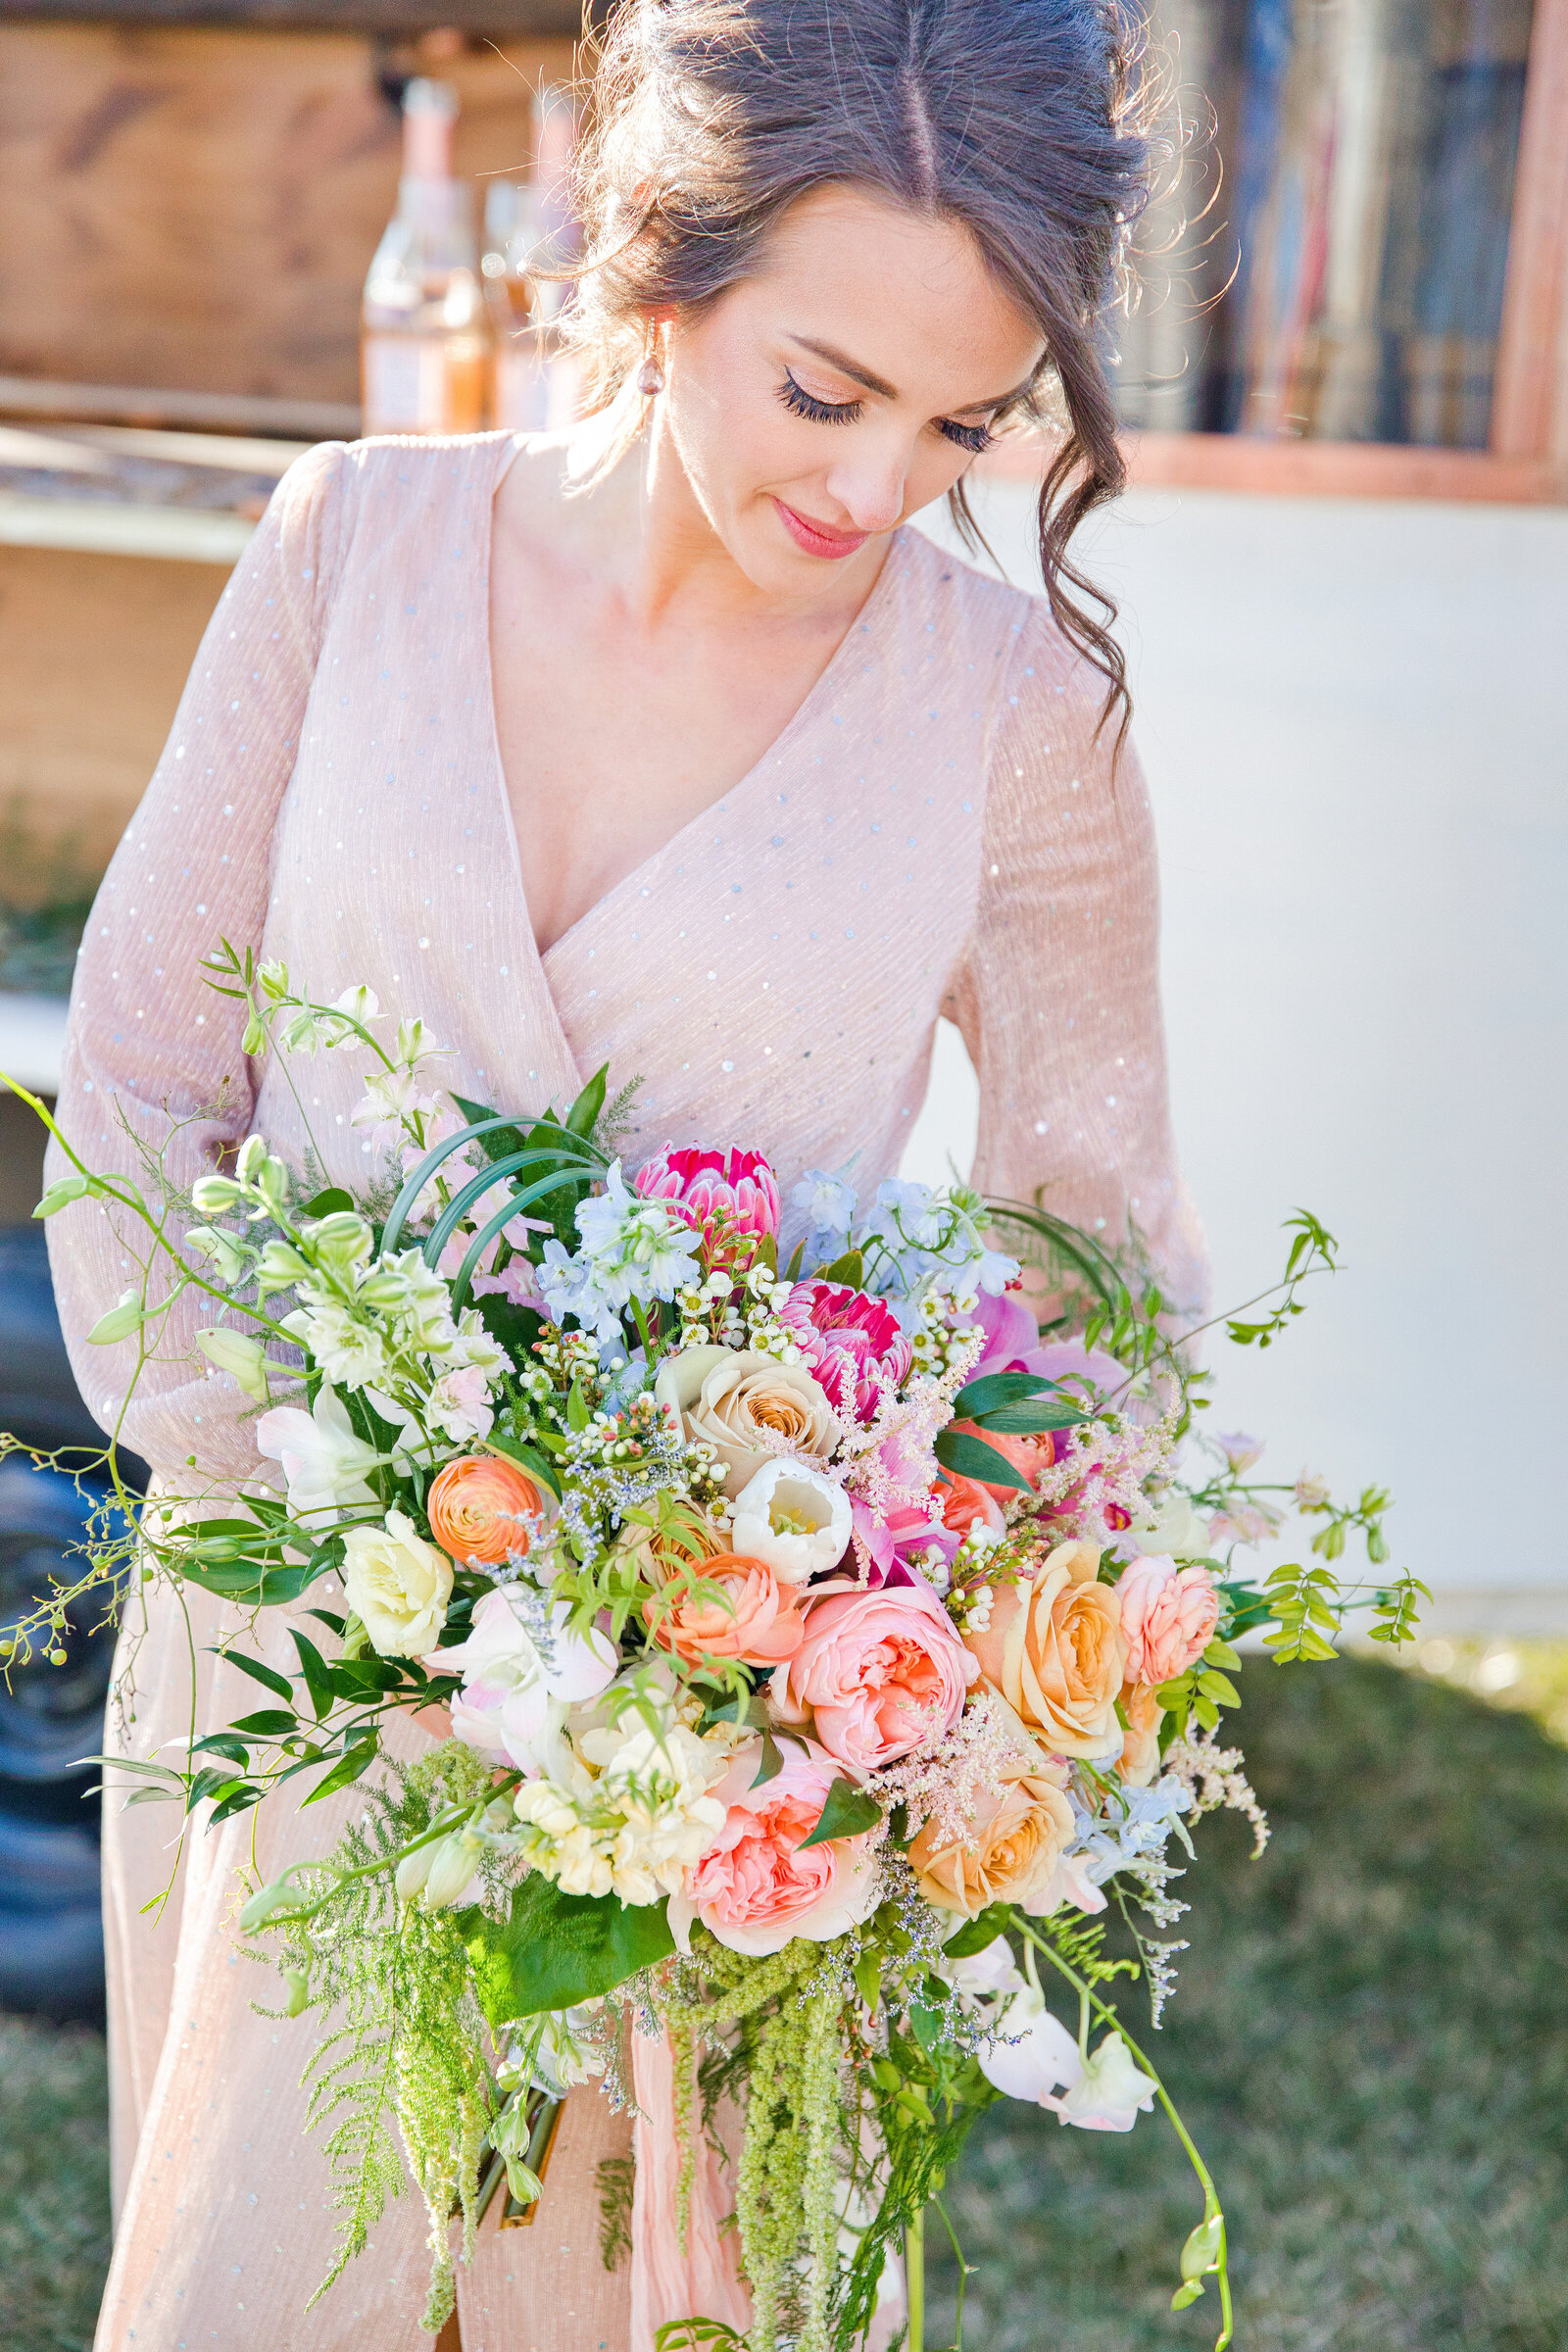 Bride standing in a pale pink dress holding her wedding bouquet looking down at it.